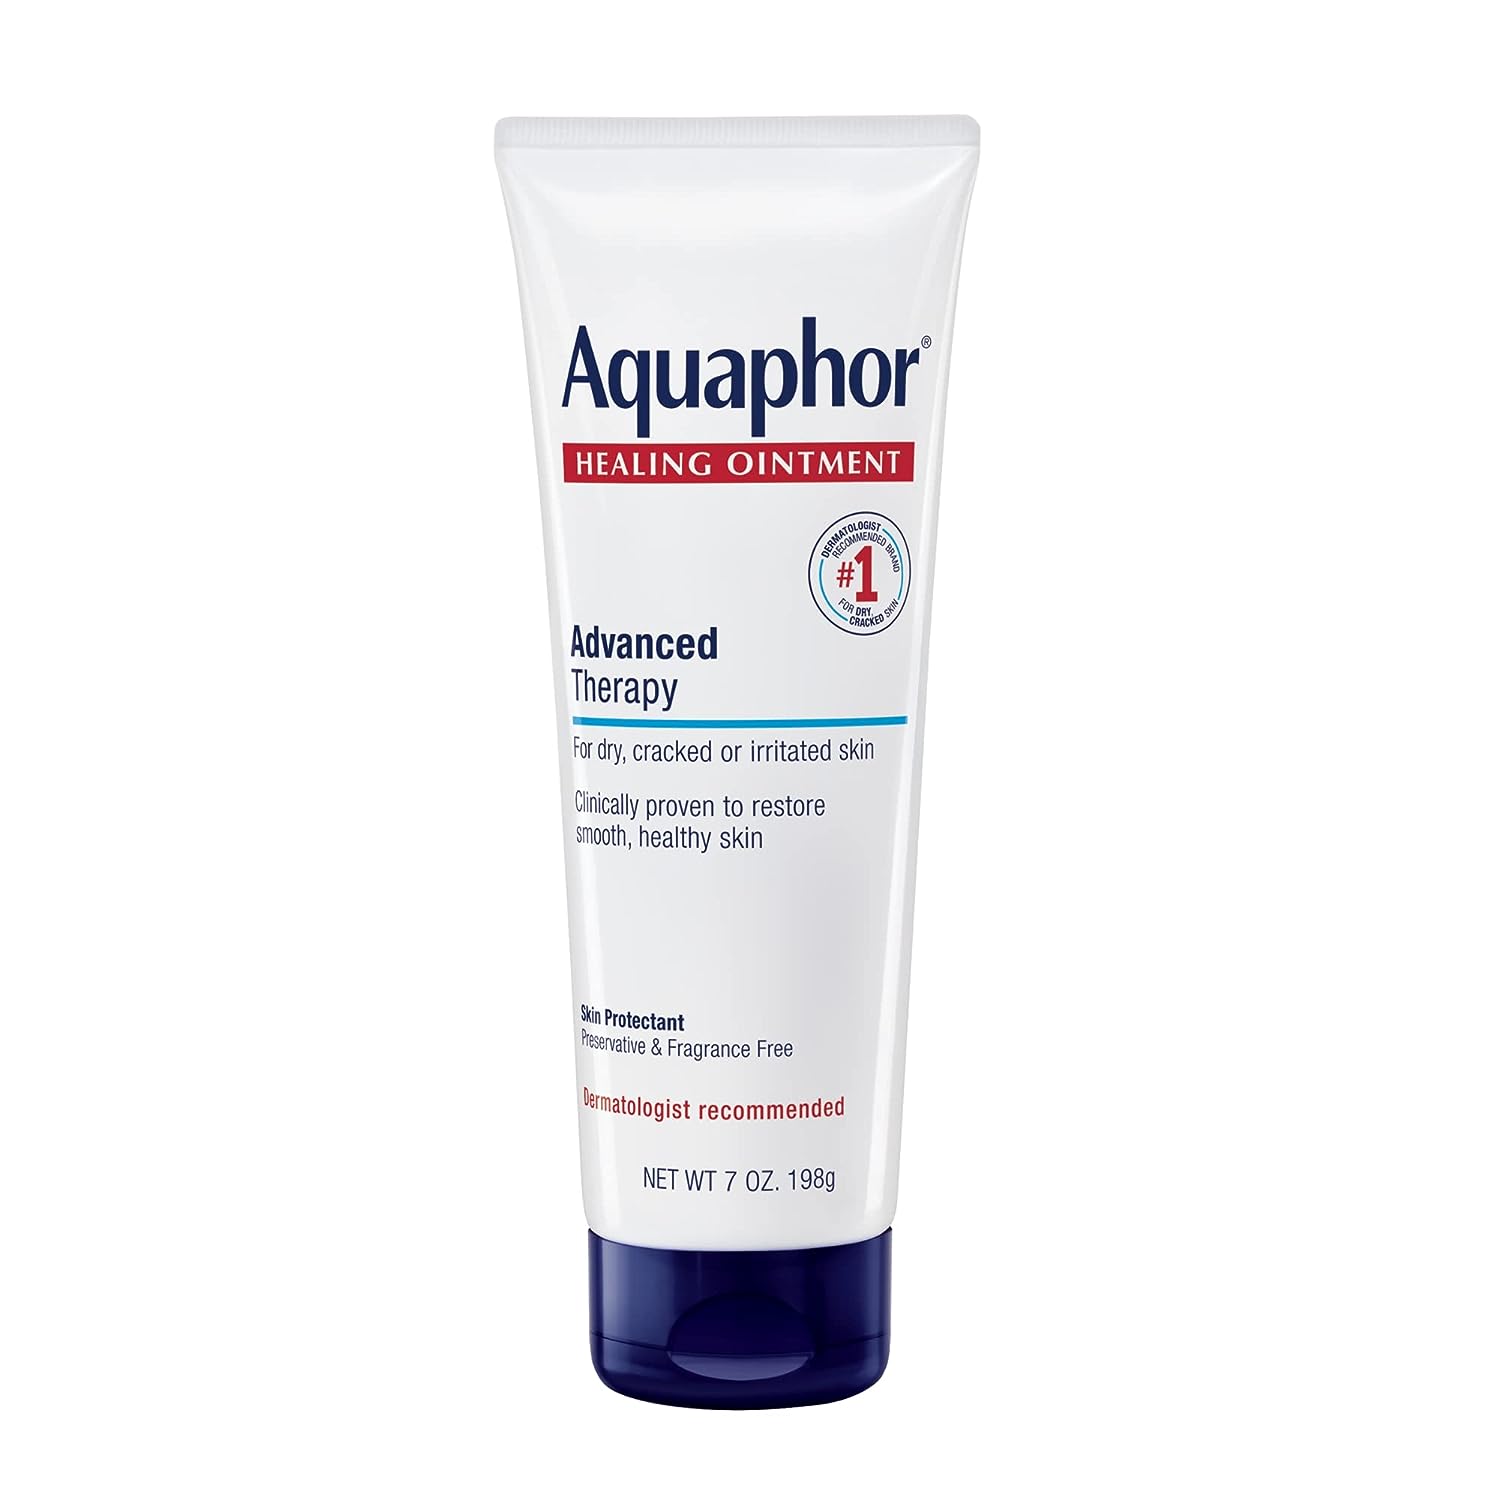 Aquaphor Healing Ointment Skin Moisturizer: 7-Oz Tube $9.71, 3-Count 1.75-Oz Tubes$12.25 ($4.08 Each), & More w/S&S + Free Shipping w/ Prime or on Orders $35+